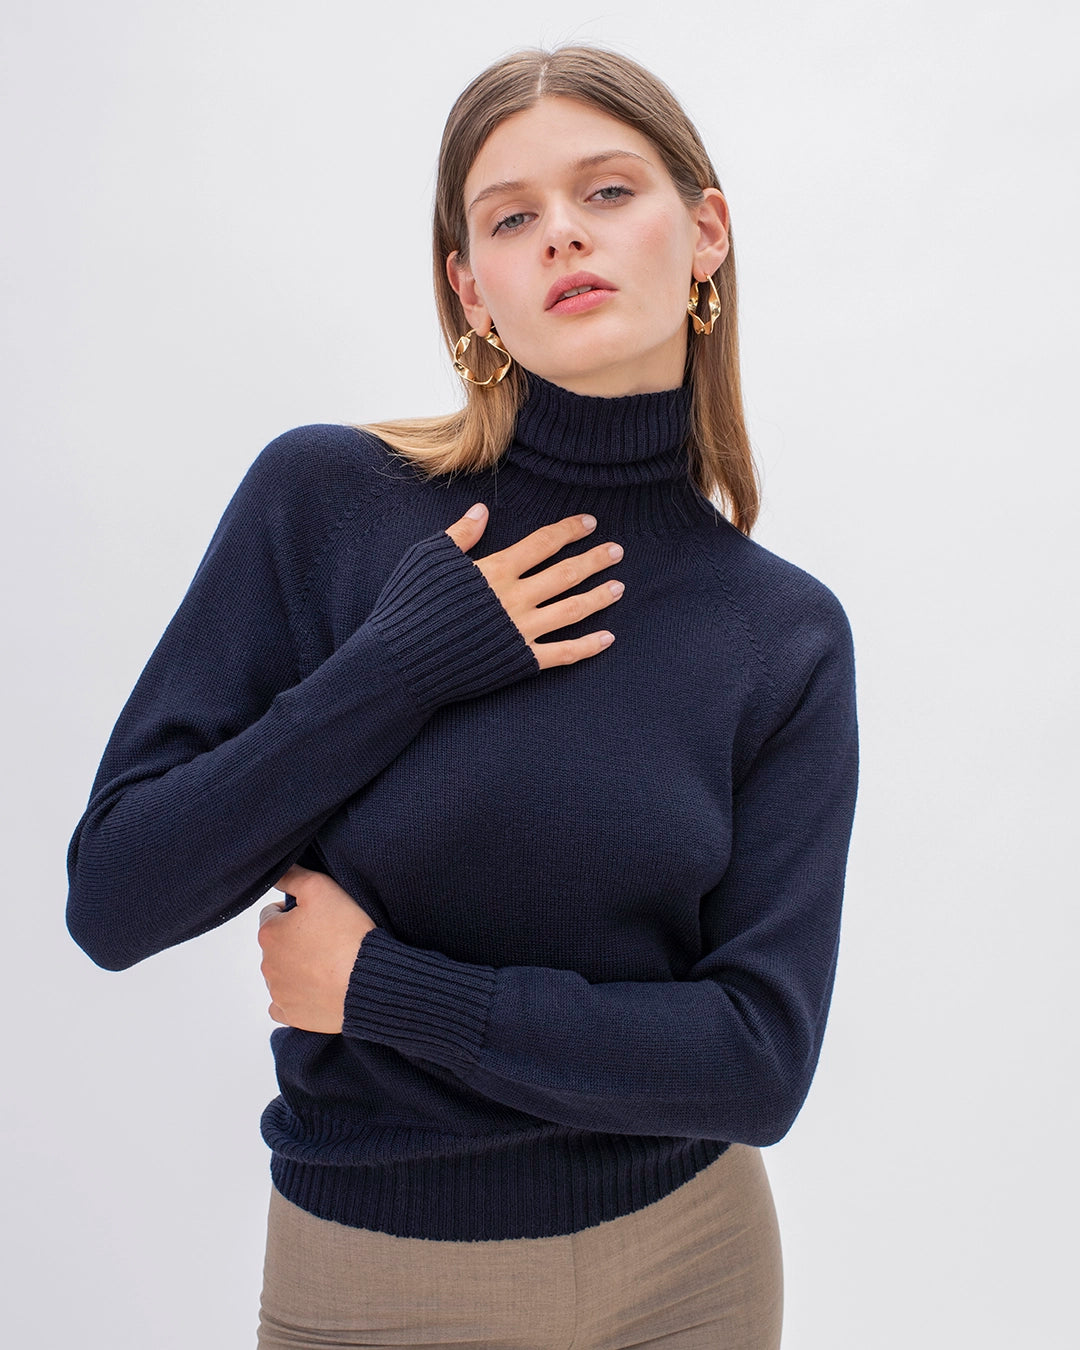 Sweater_Meribel_Bleunuit_1-sweater-in-knit-details-twisted-neck-rolled-long-sleeves-french-mark-